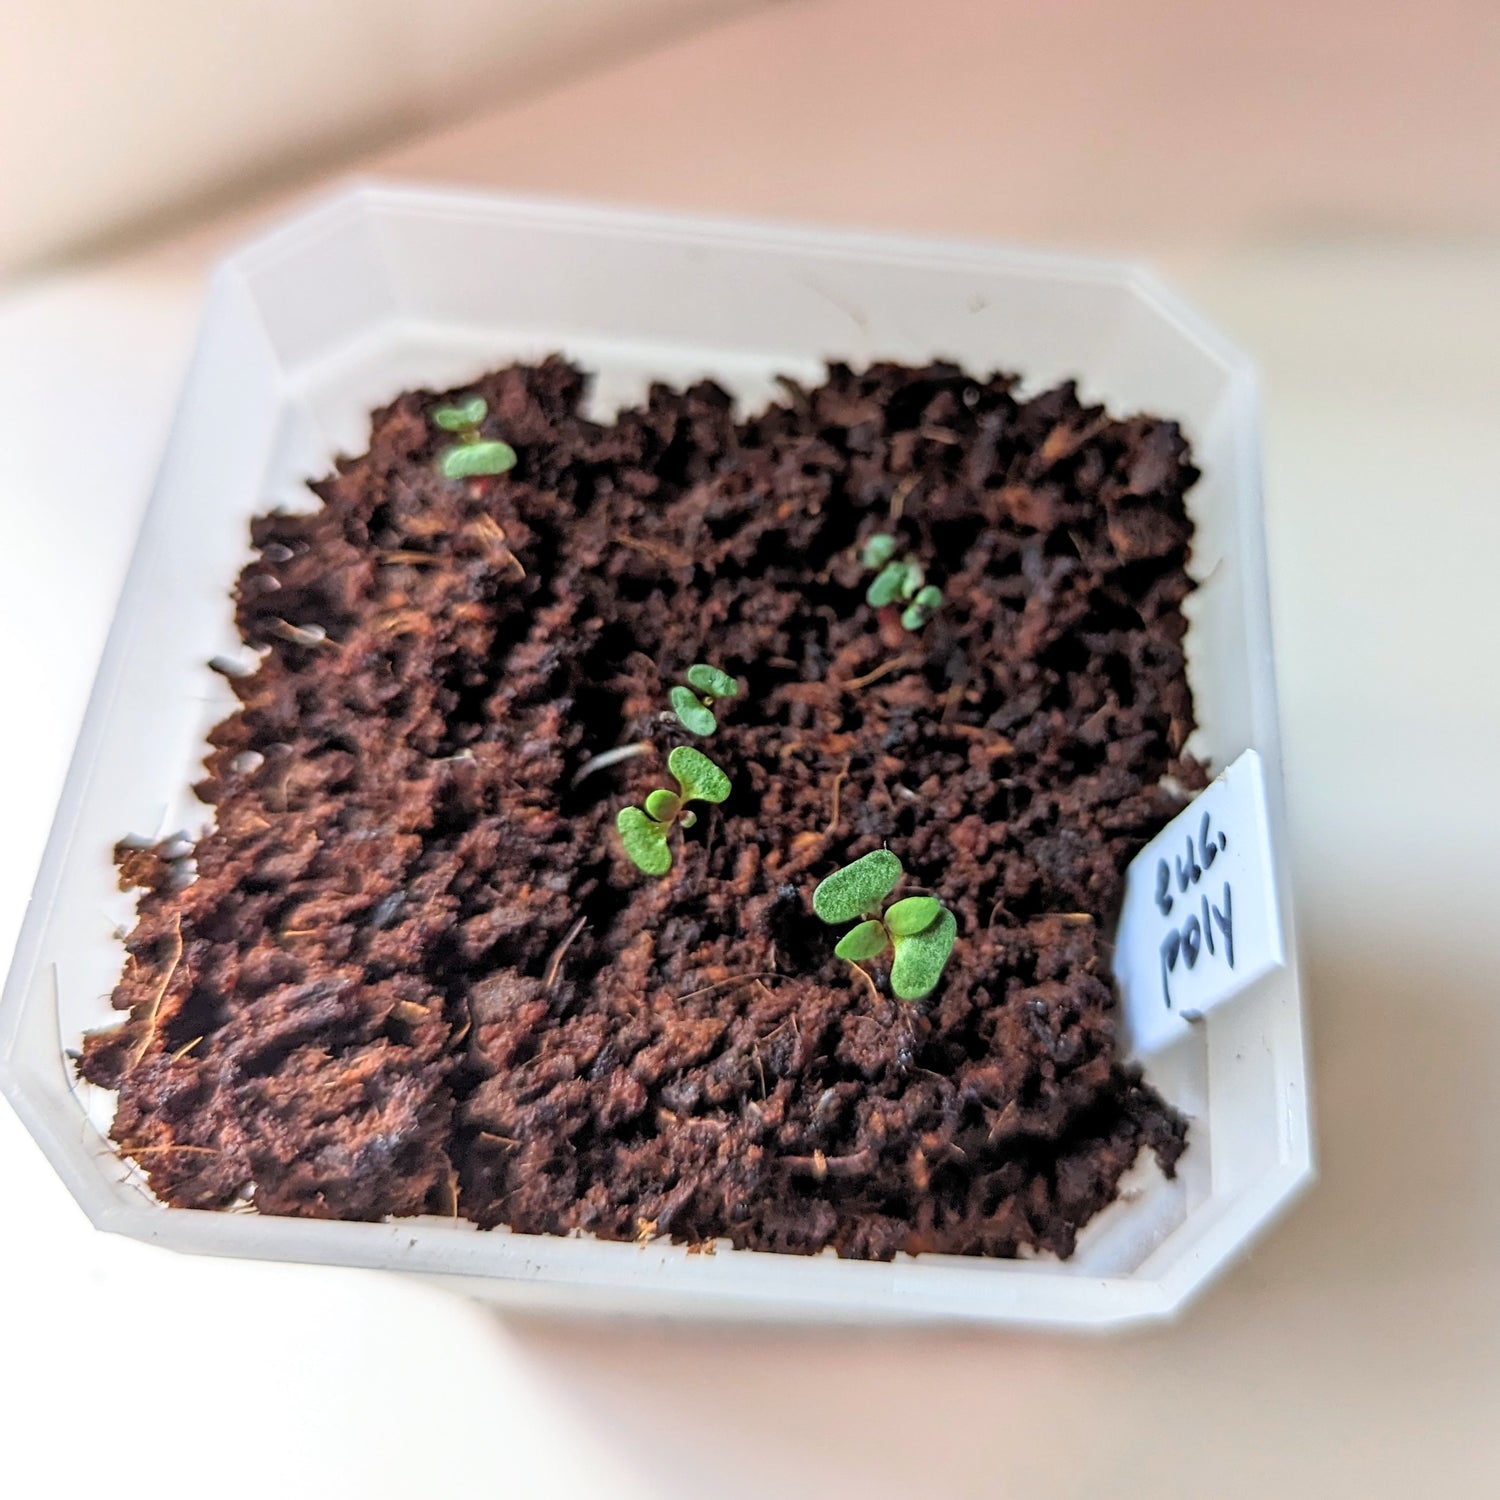 Why your Seeds aren’t Germinating: Common Mistakes Made Growing Houseplants from Seed, and How to Fix Them